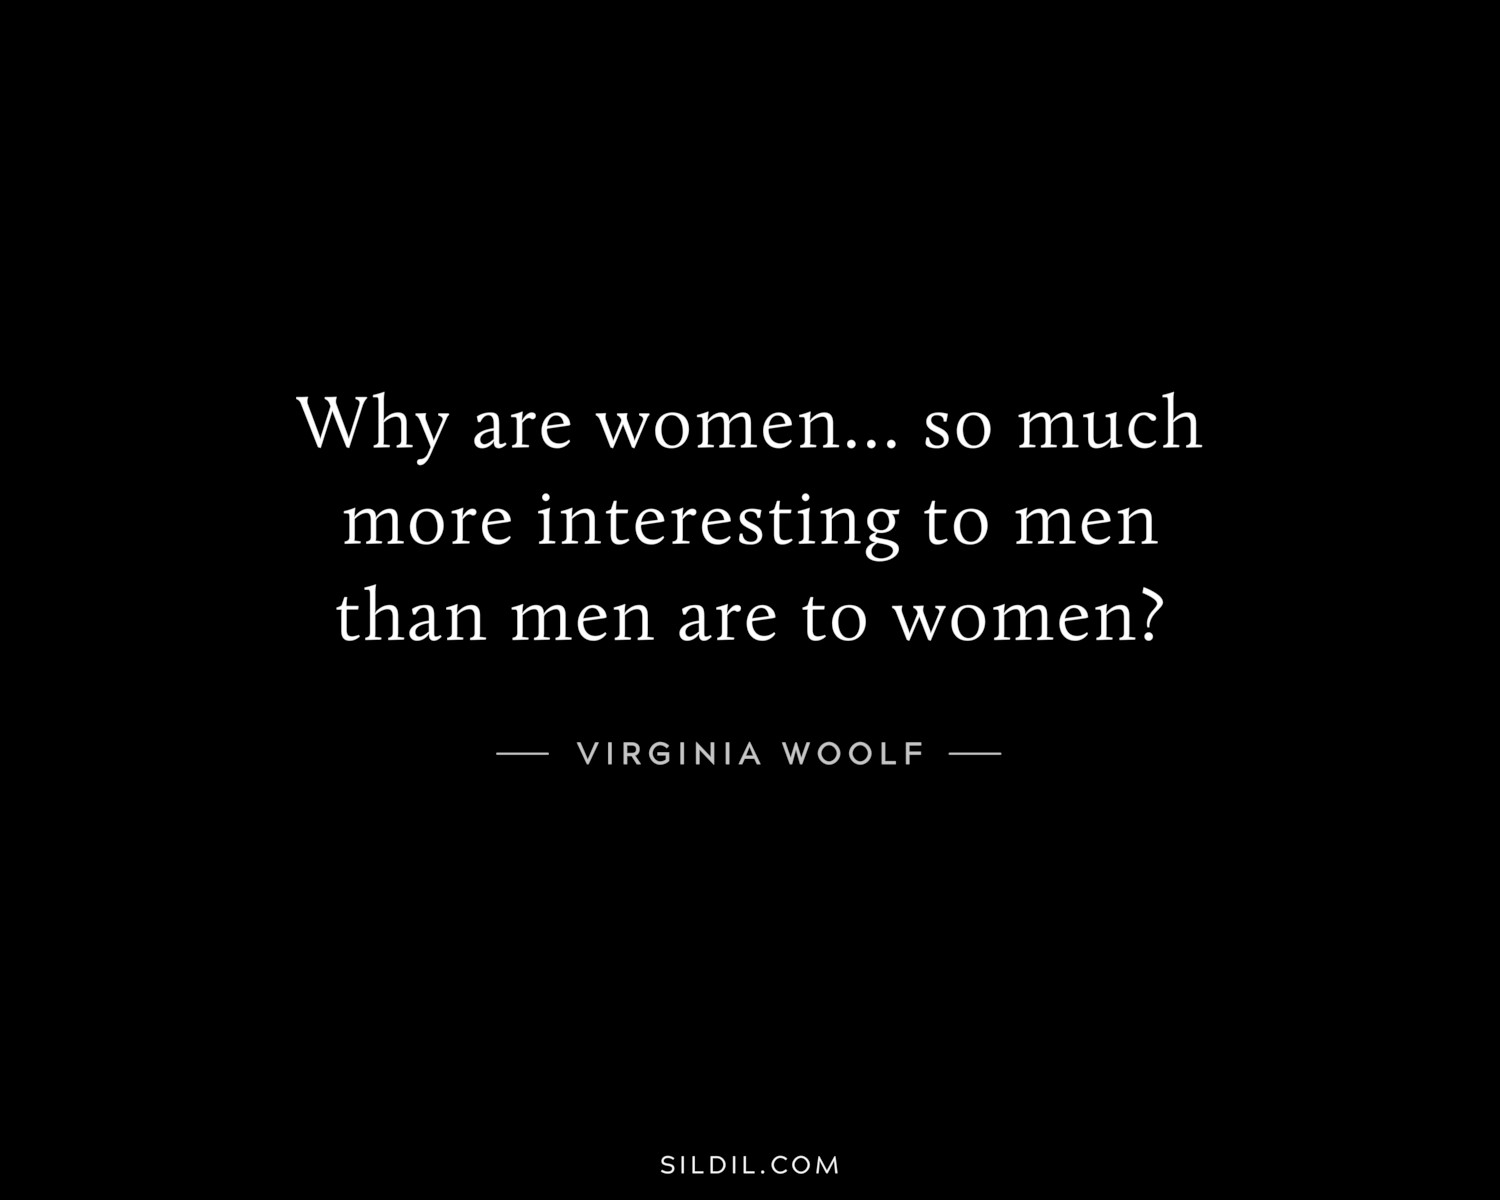 Why are women... so much more interesting to men than men are to women?